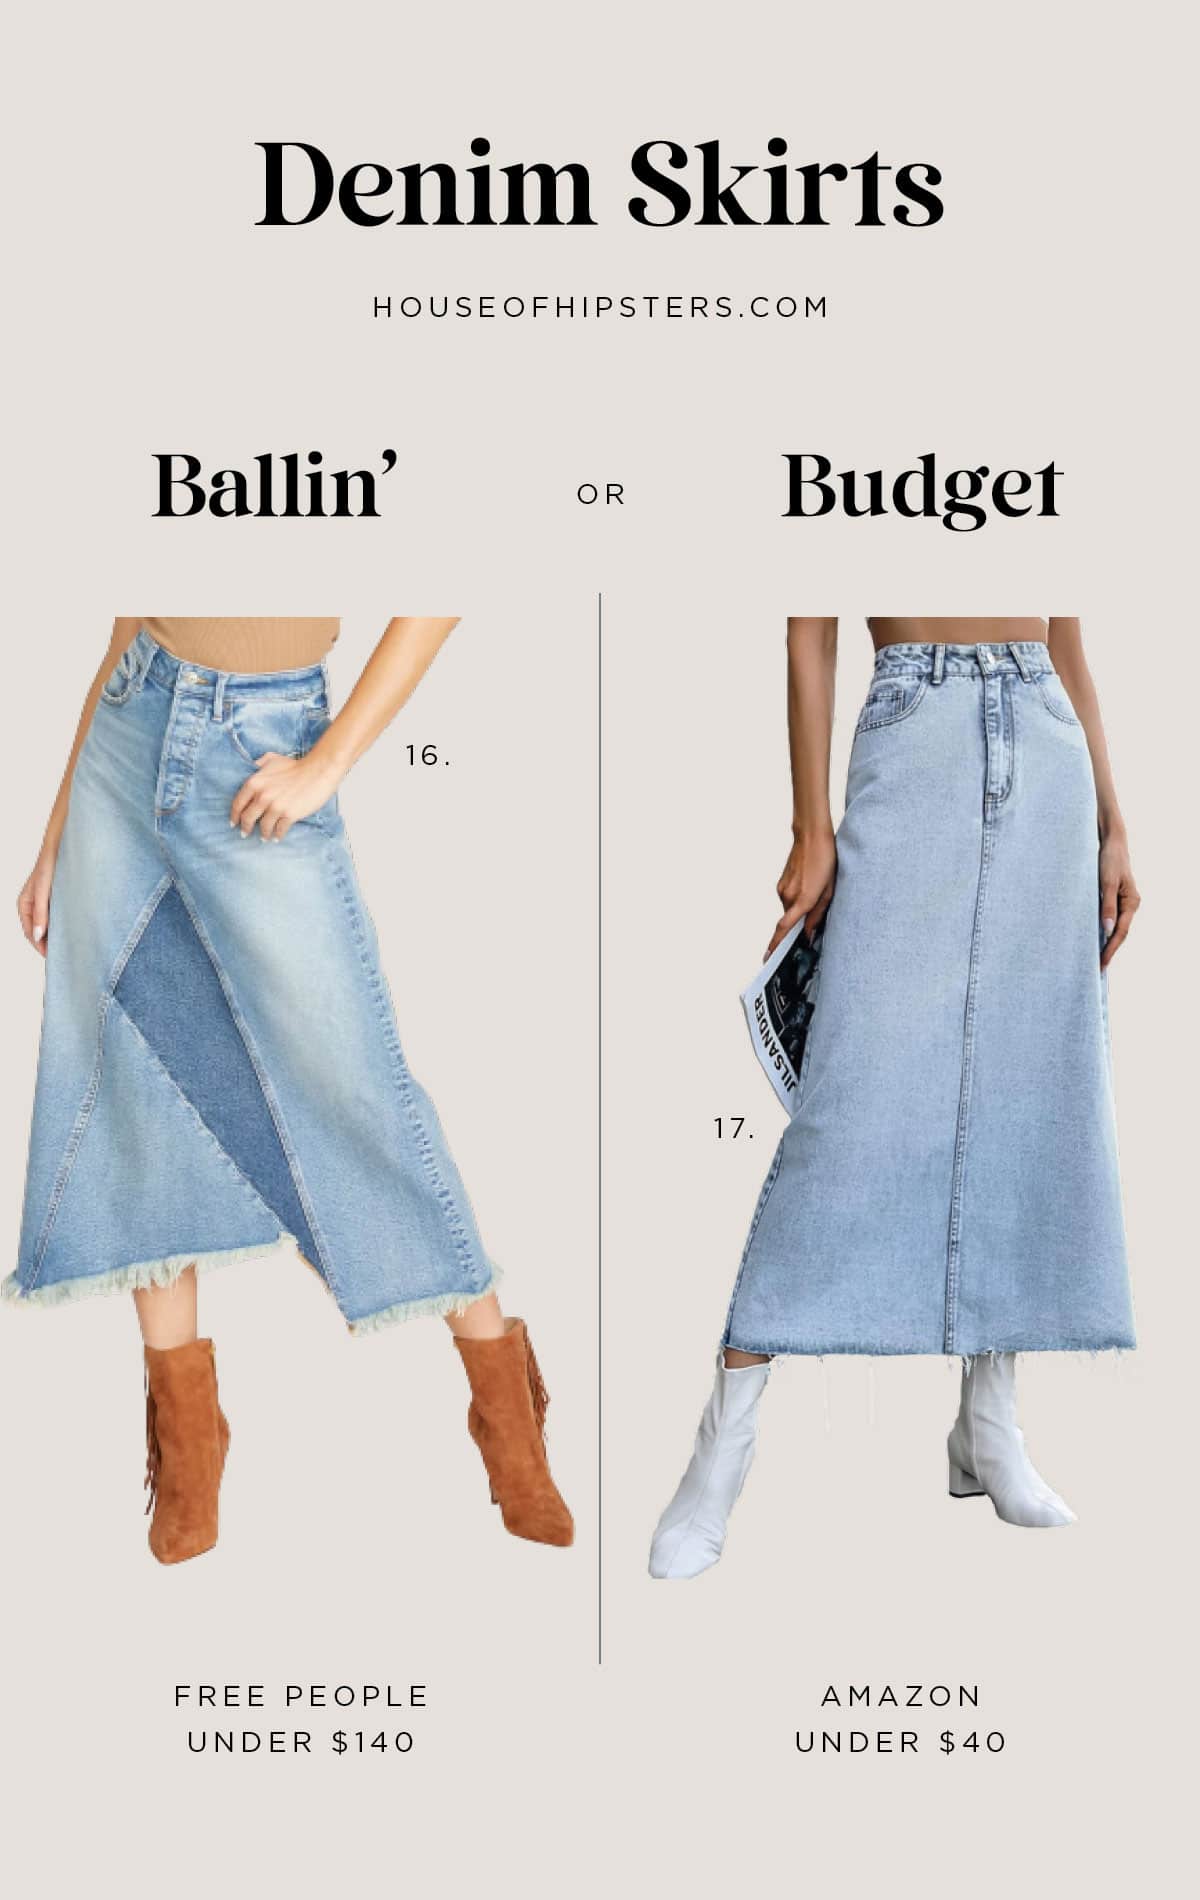 Long Denim Skirts For Women Are Made To Be Your Everyday Pick.